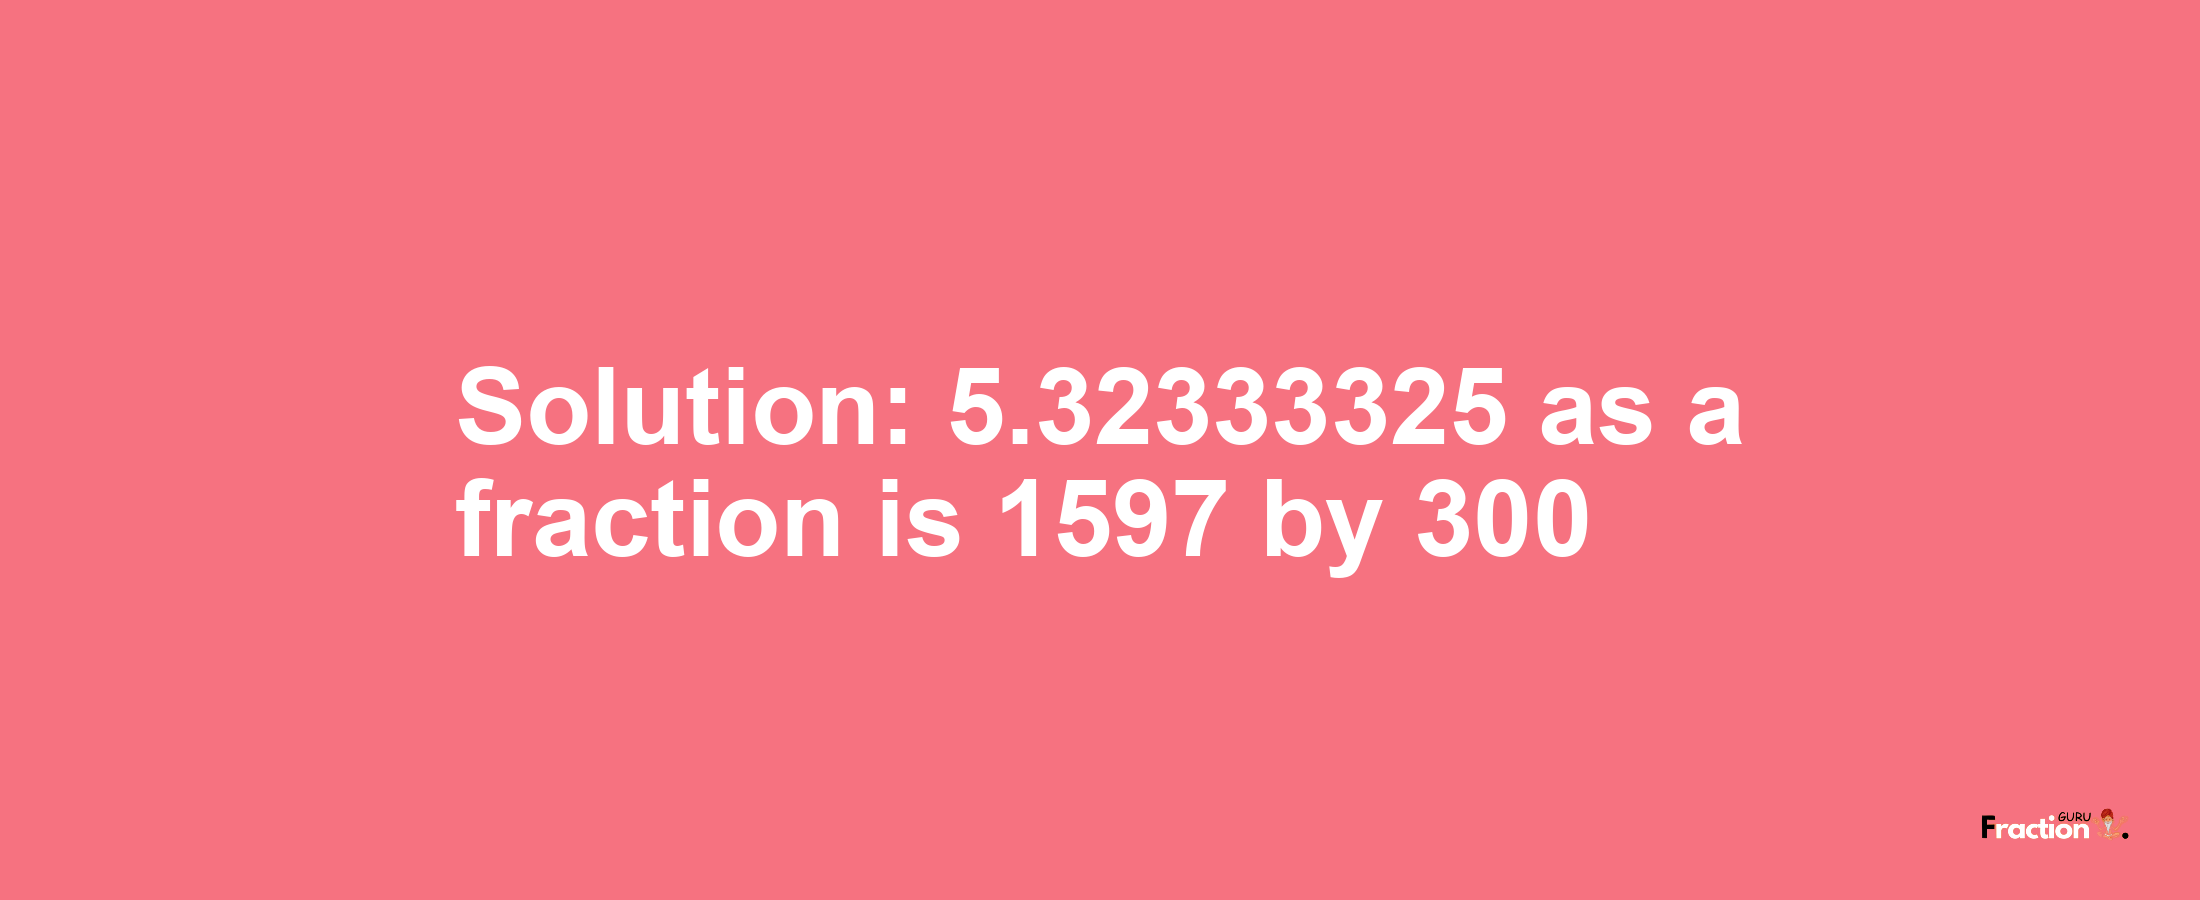 Solution:5.32333325 as a fraction is 1597/300